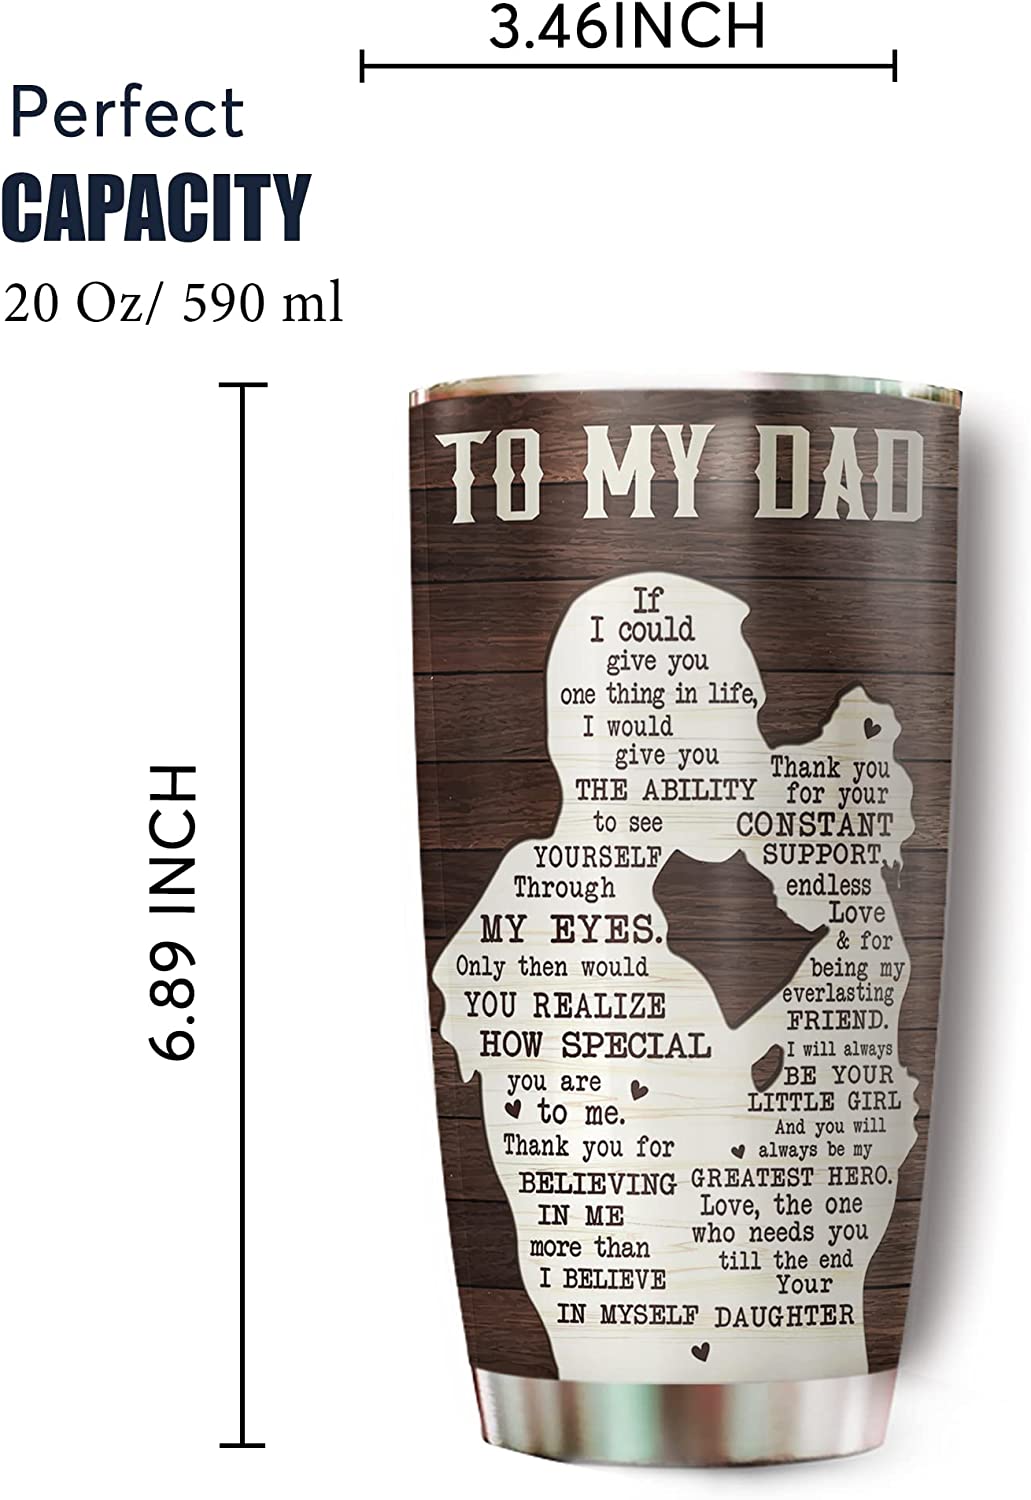 Blanket Thoughtful Gift Ideas For Dad, Funny Dad Gifts, Good Christmas Gifts  For Dad, Best Presents For Dad, Good Birthday Gifts For Dad - Sweet Family  Gift